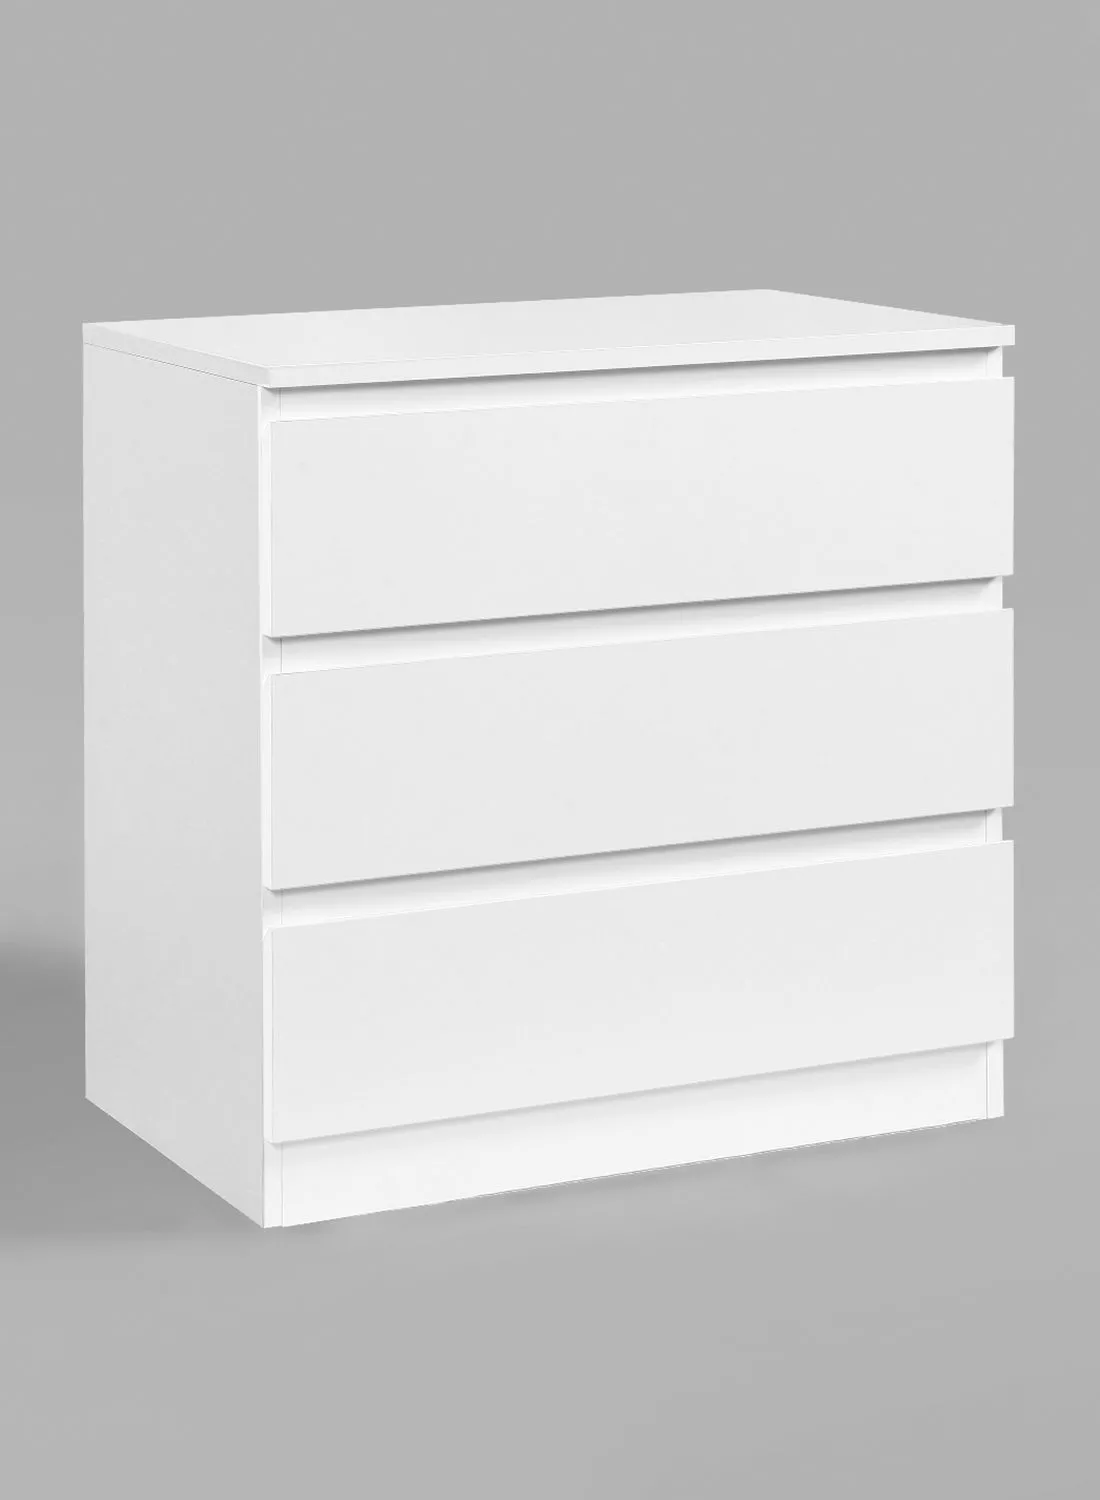 Switch Bedroom Makeup Vanity - White Bran Collection 700 X 450 X 720 - 3 Drawer Dresser For Hairstyle